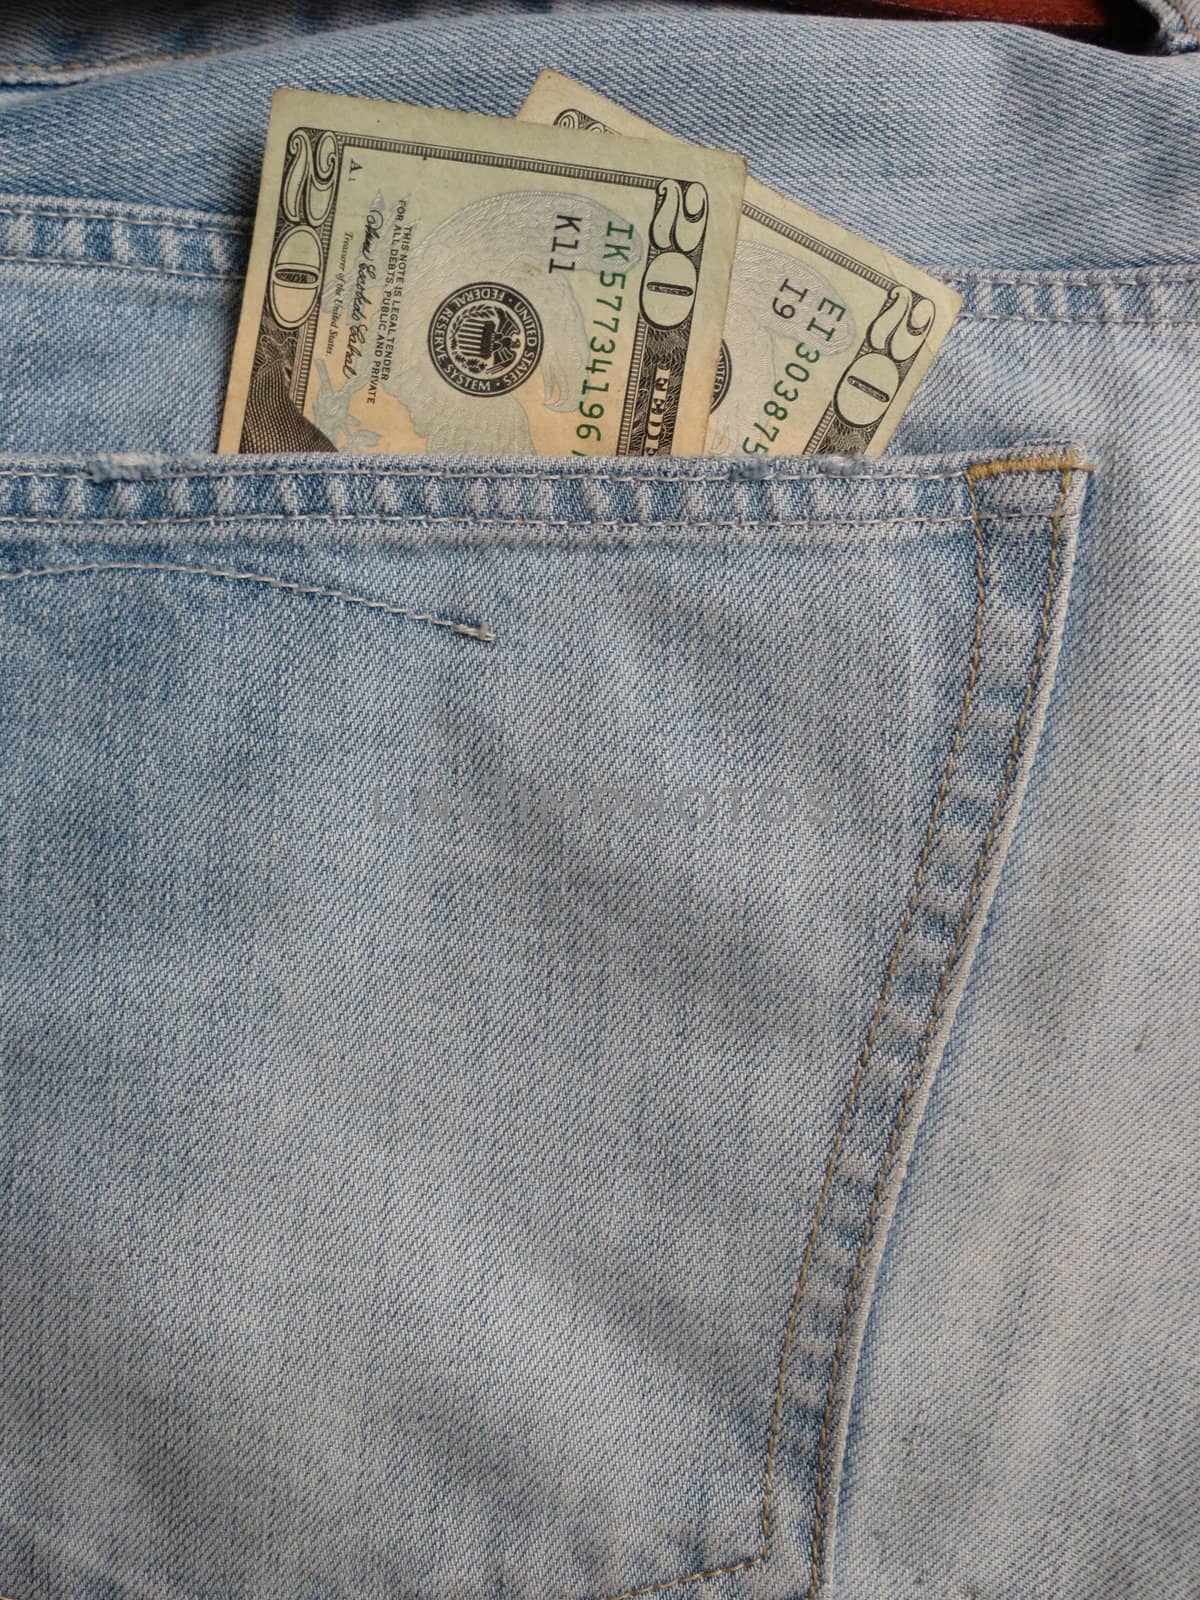 American blue jeans pocket filled with USD banknotes money 